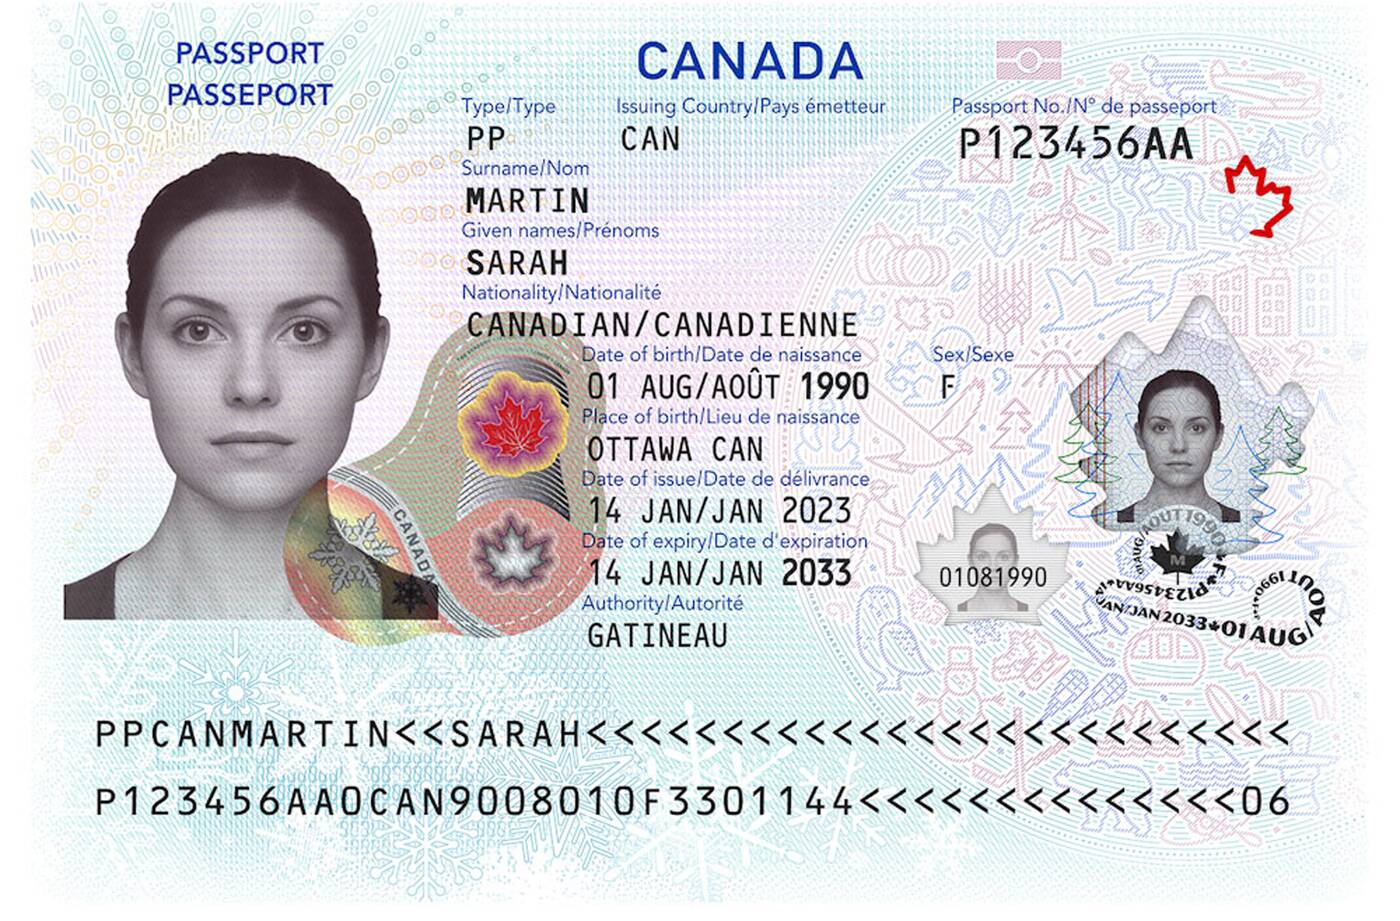 Canada just unveiled new passports with several hightech features